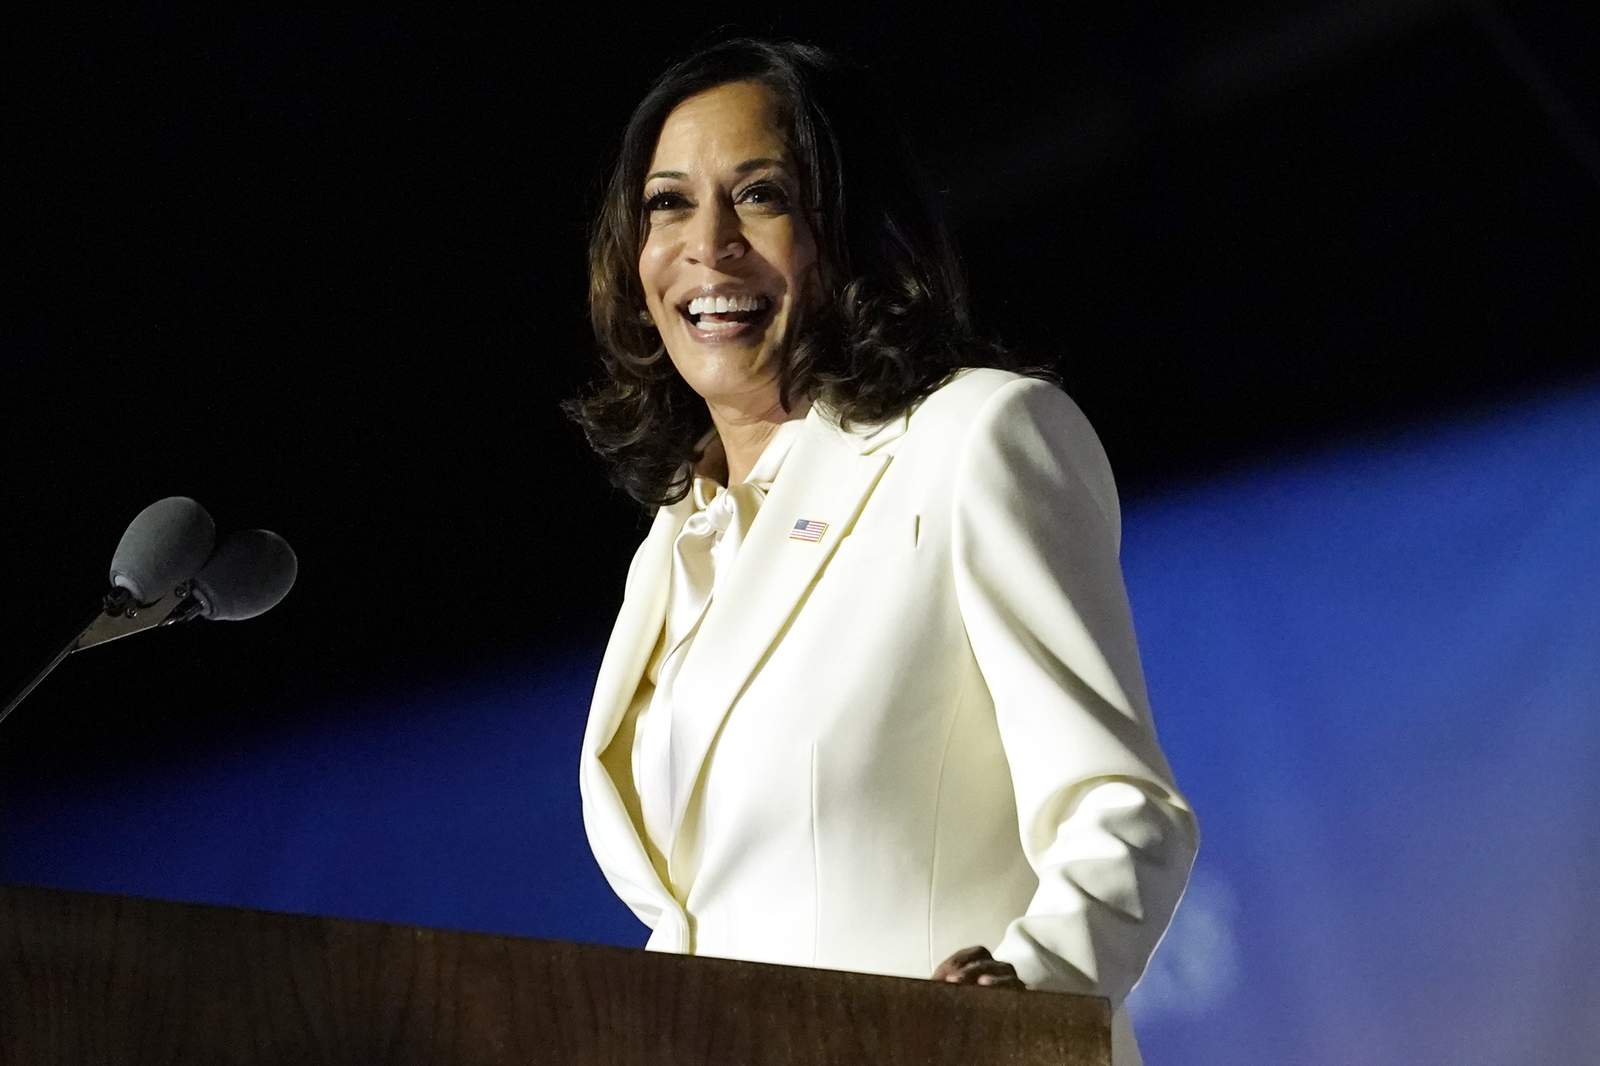 Harris prepares for central role in Biden's White House